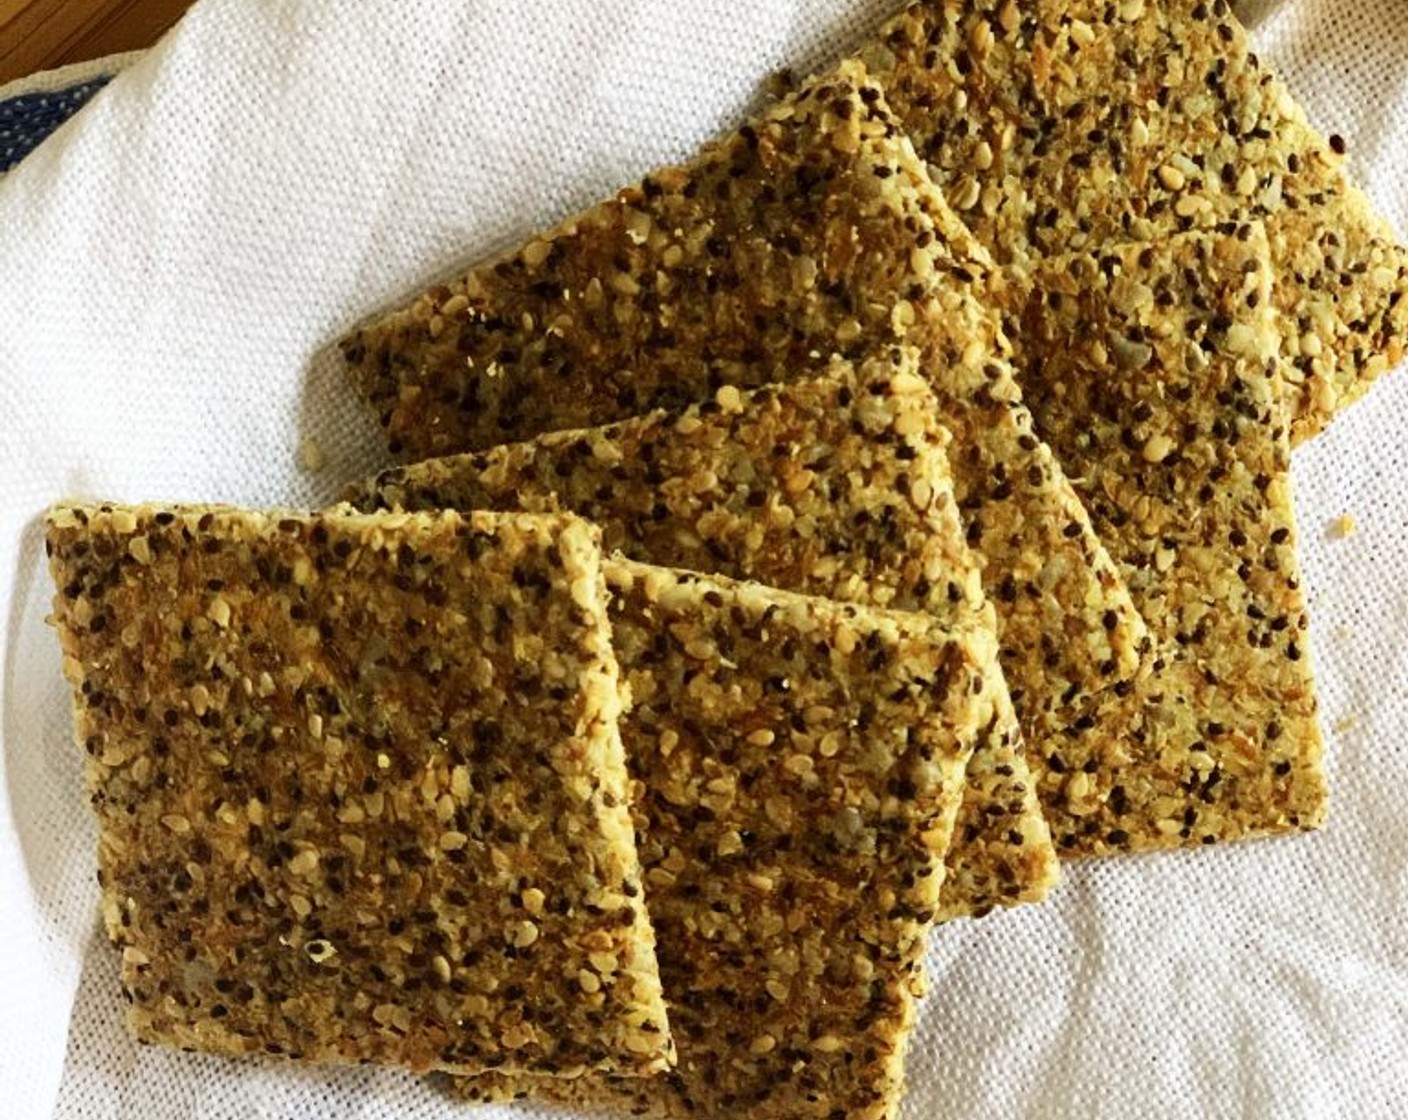 step 6 Remove from the oven and cut it into squares (or any other shape you like). If you want your crackers really crunchy, pop them back into the oven at 300 degrees F (150 degrees C) for 10 more minutes. Once cooled store them in a jar or ziplock bag.